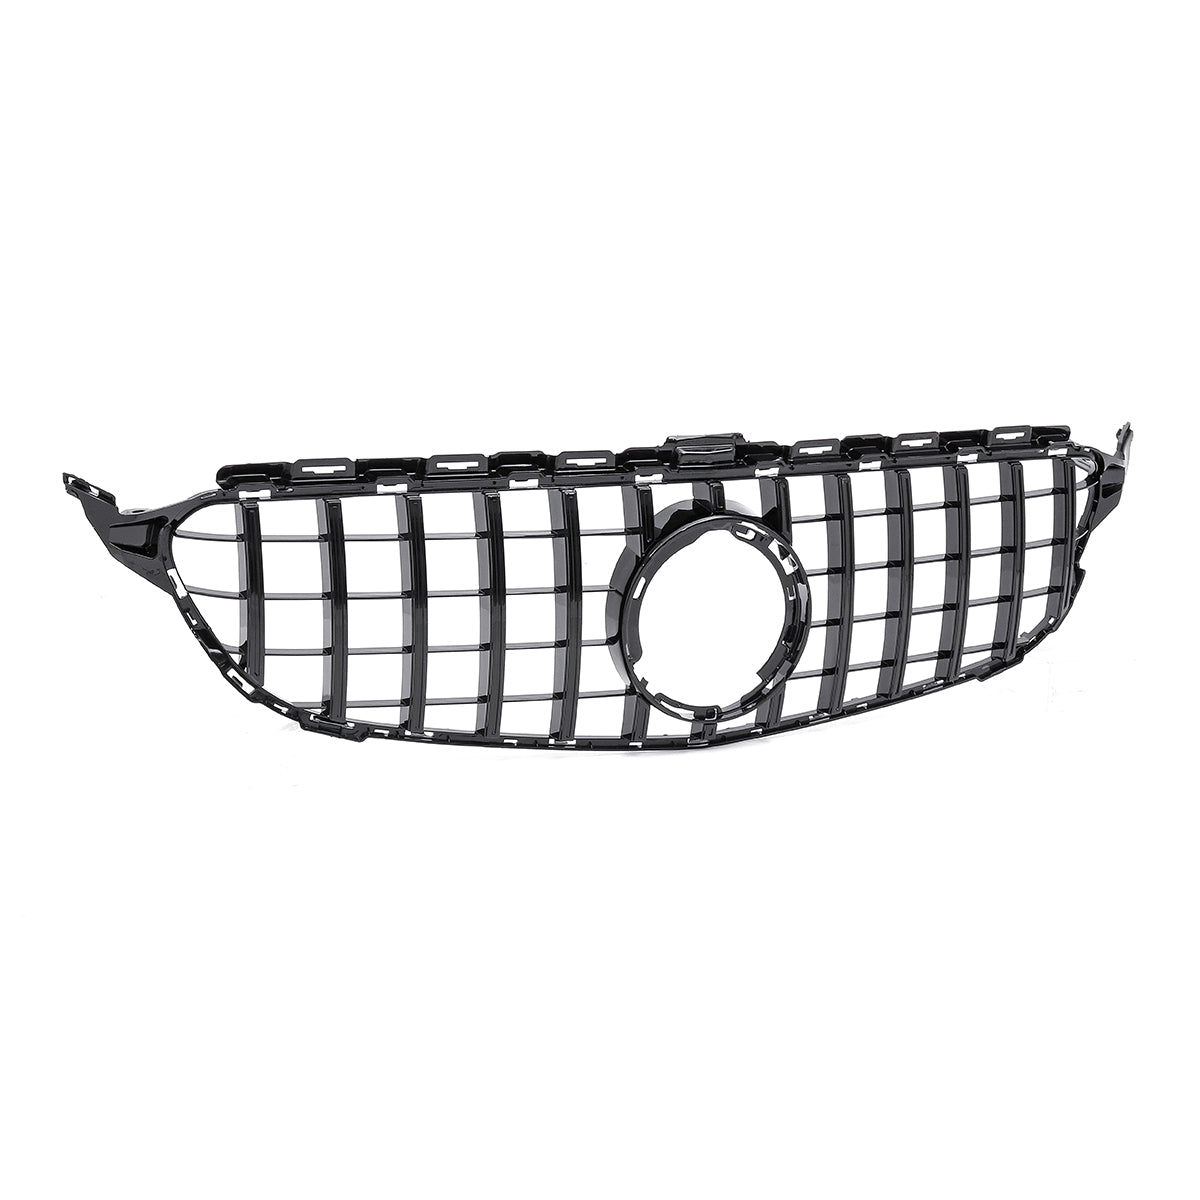 White Smoke For Mercedes Benz C Class W205 C200 C250 C300 2019 GT R Style Front Grill Grille